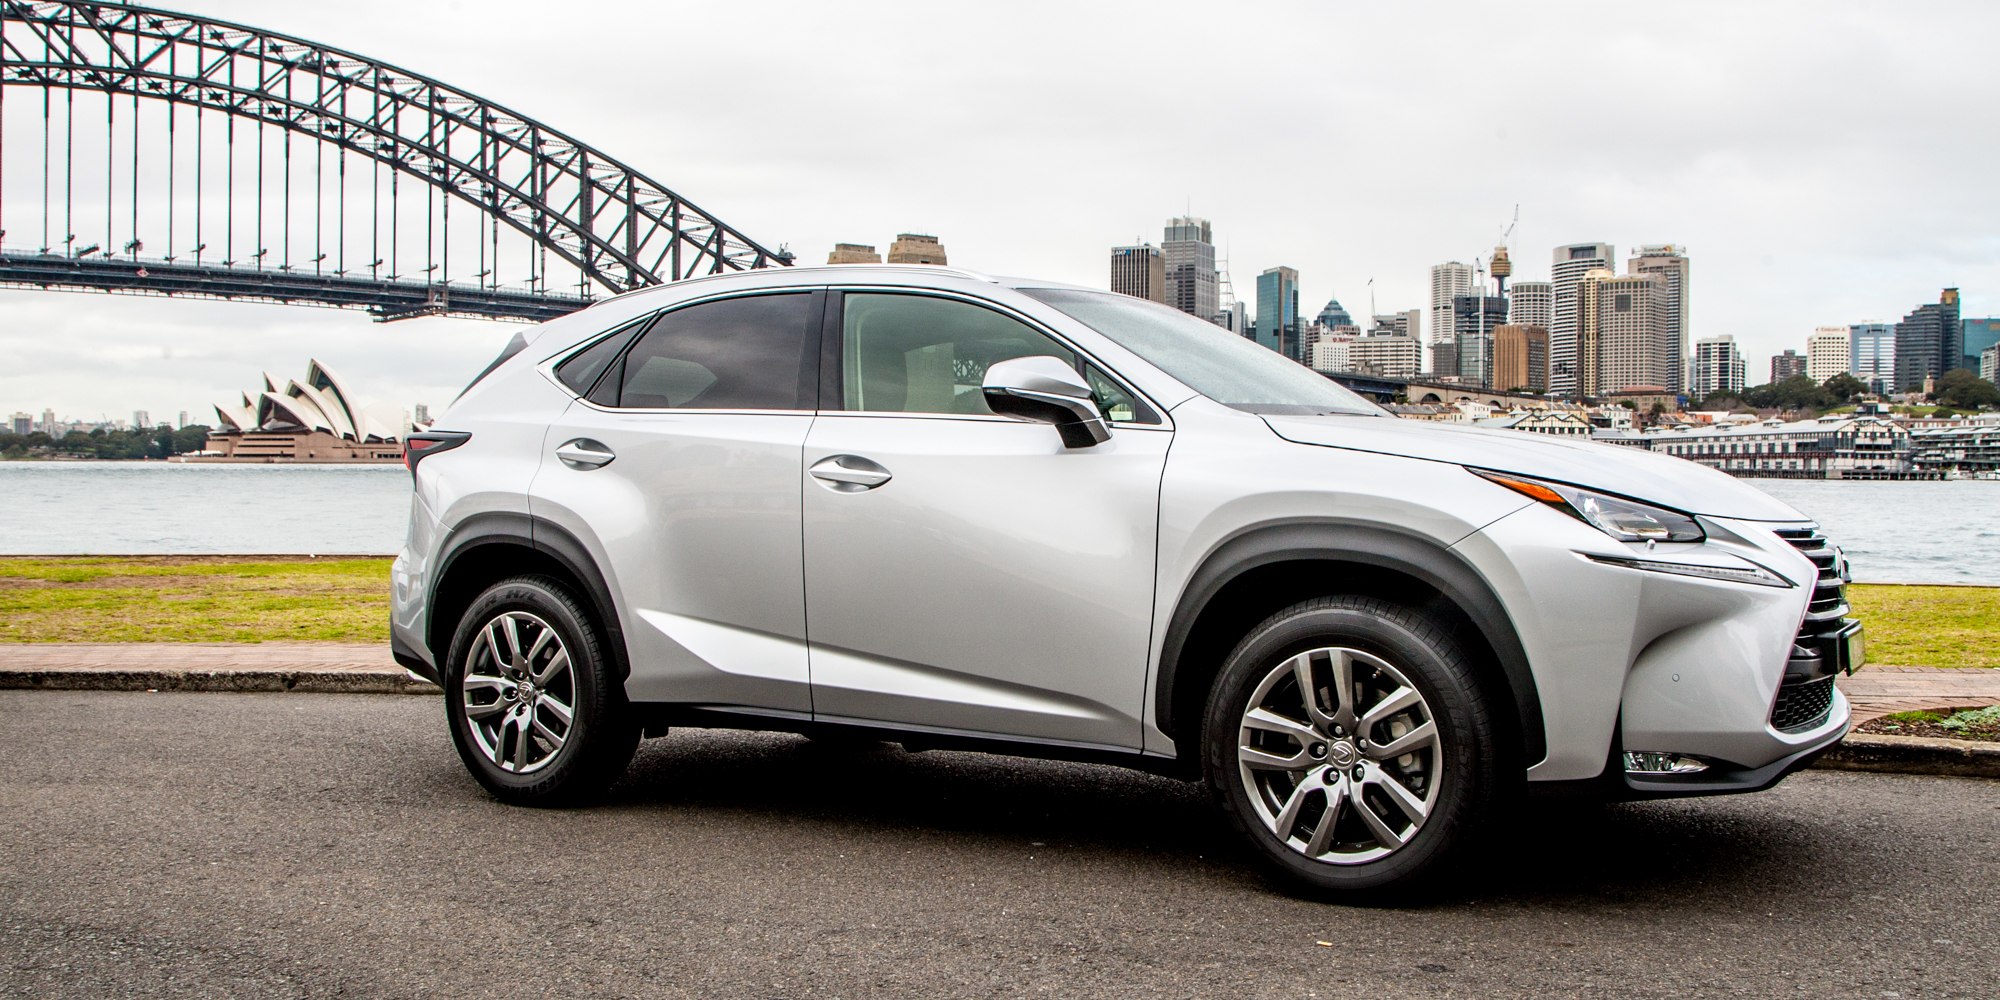 2015 Lexus NX200t Luxury Review Longterm report one